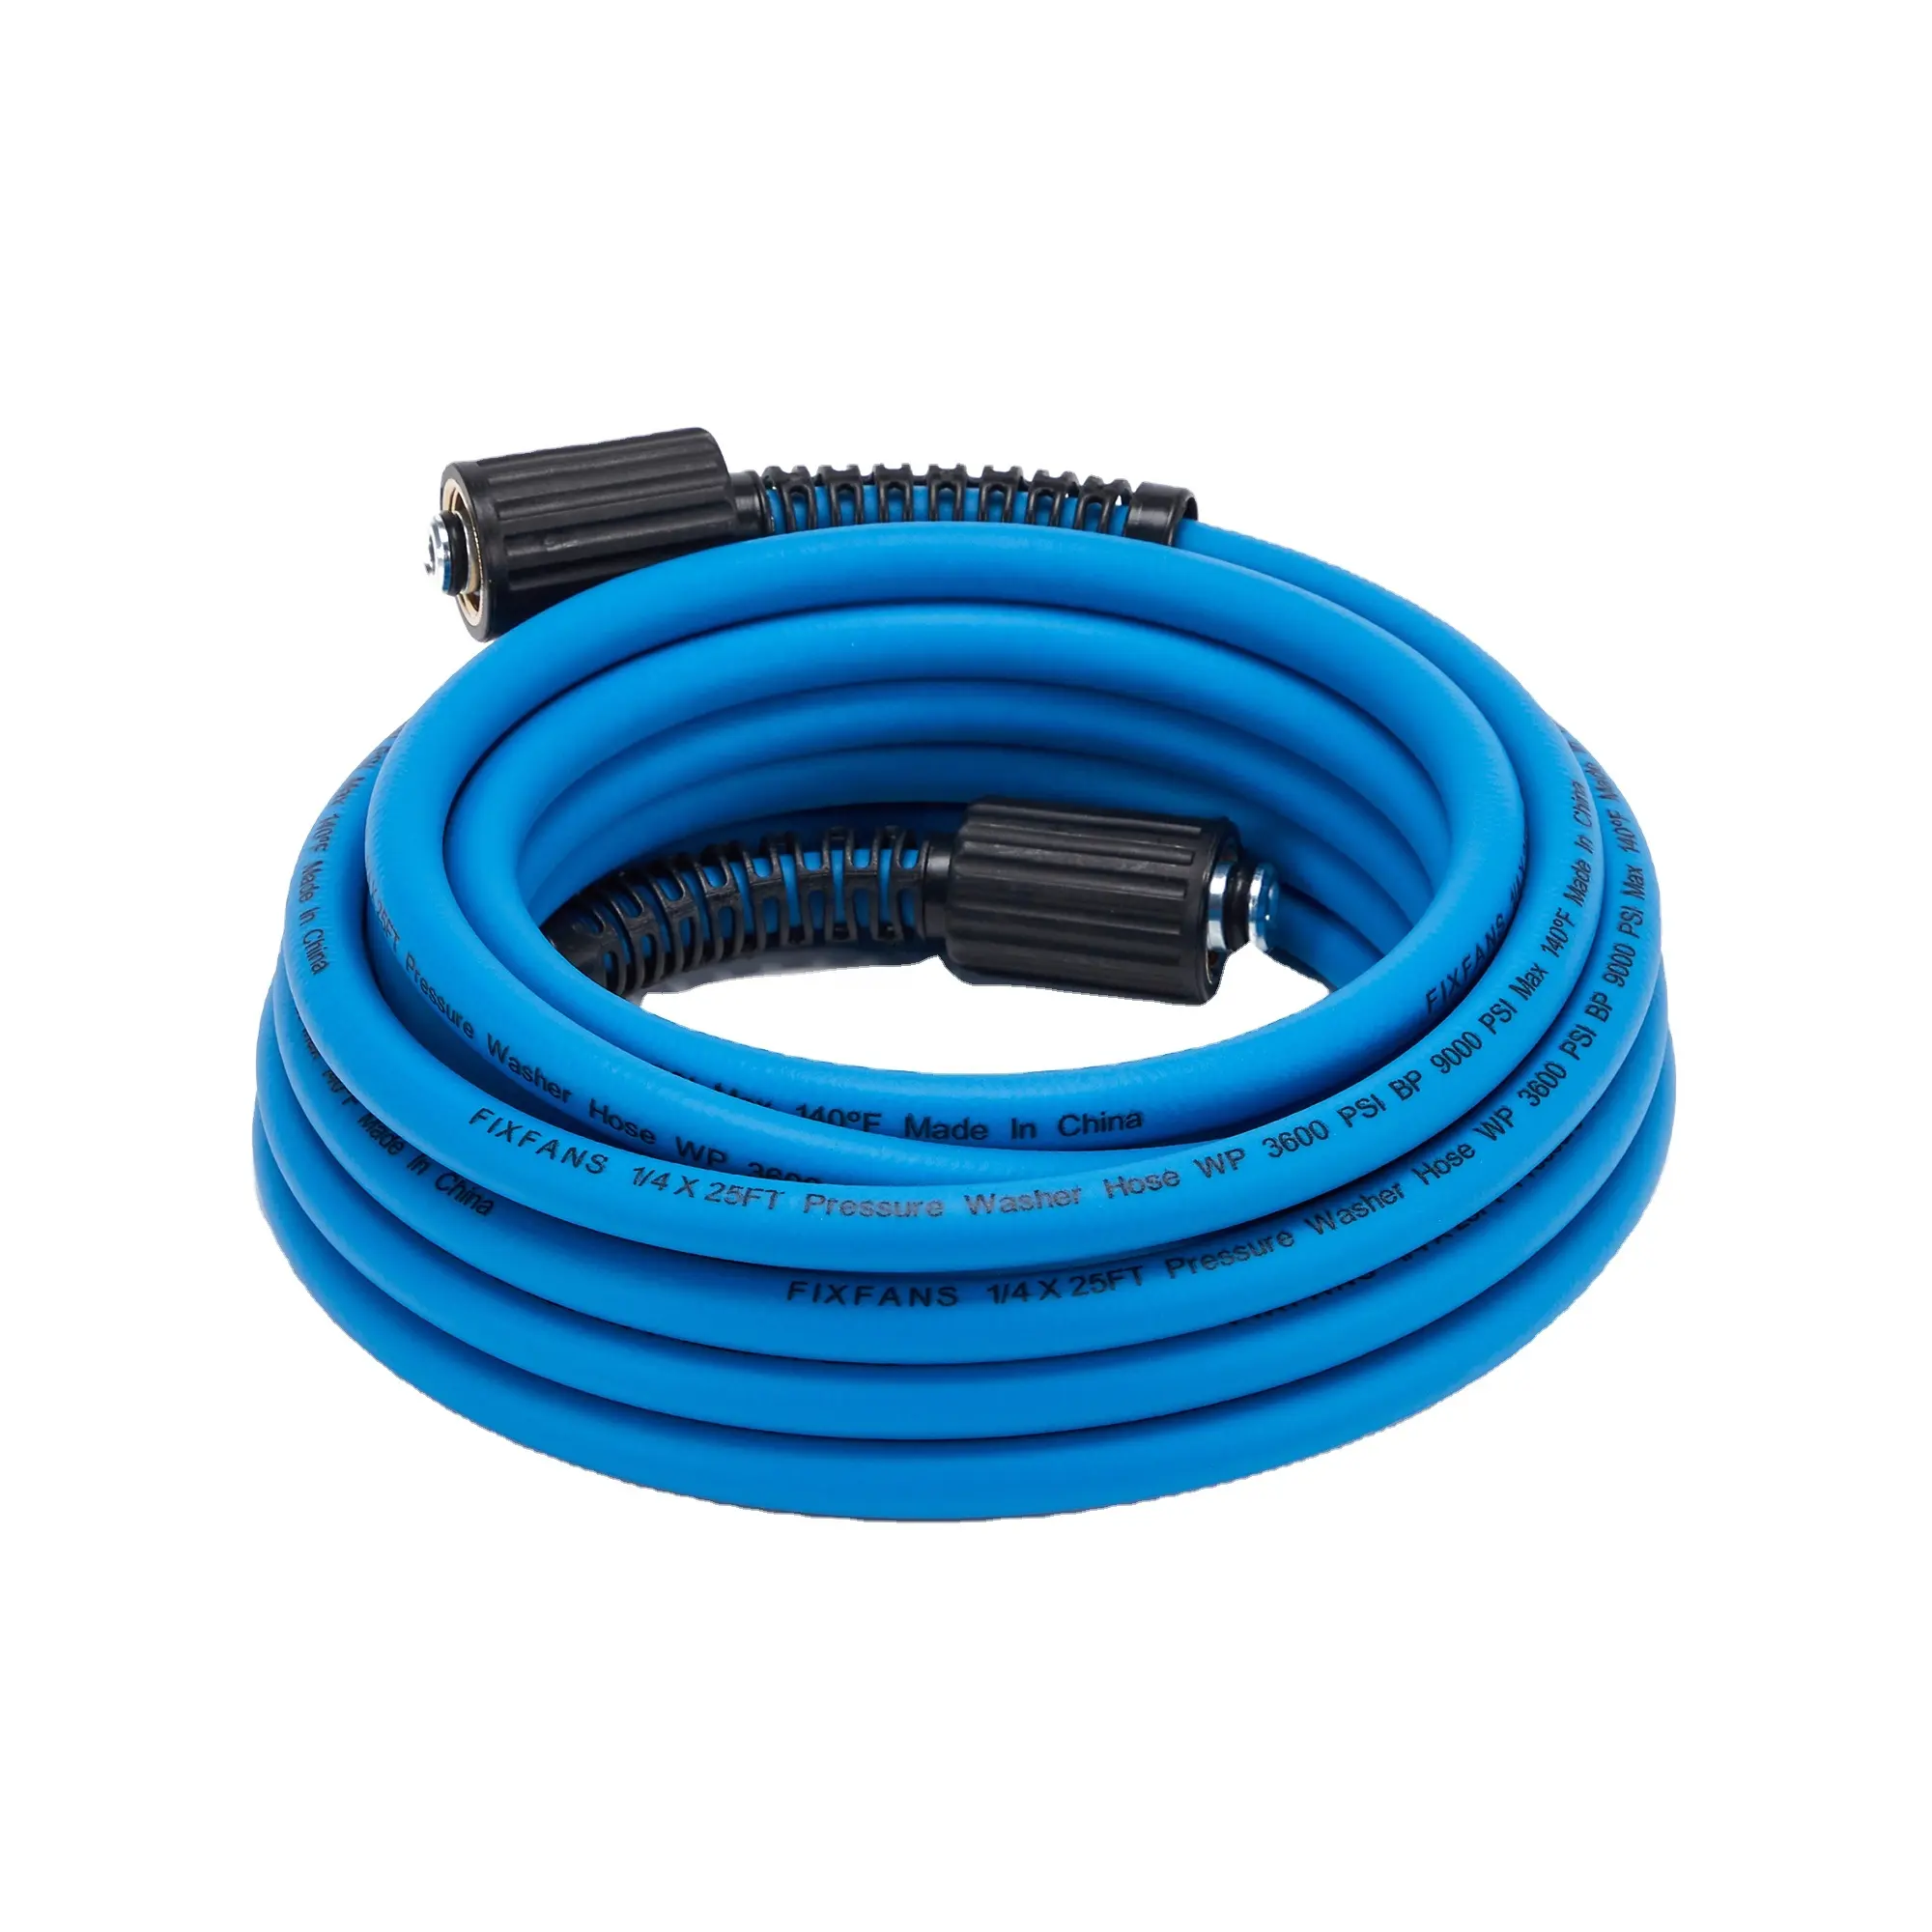 25 Ft High Pressure Washer Hose Blue Power Replacement Extension Hose Compatible With M22 Fittings